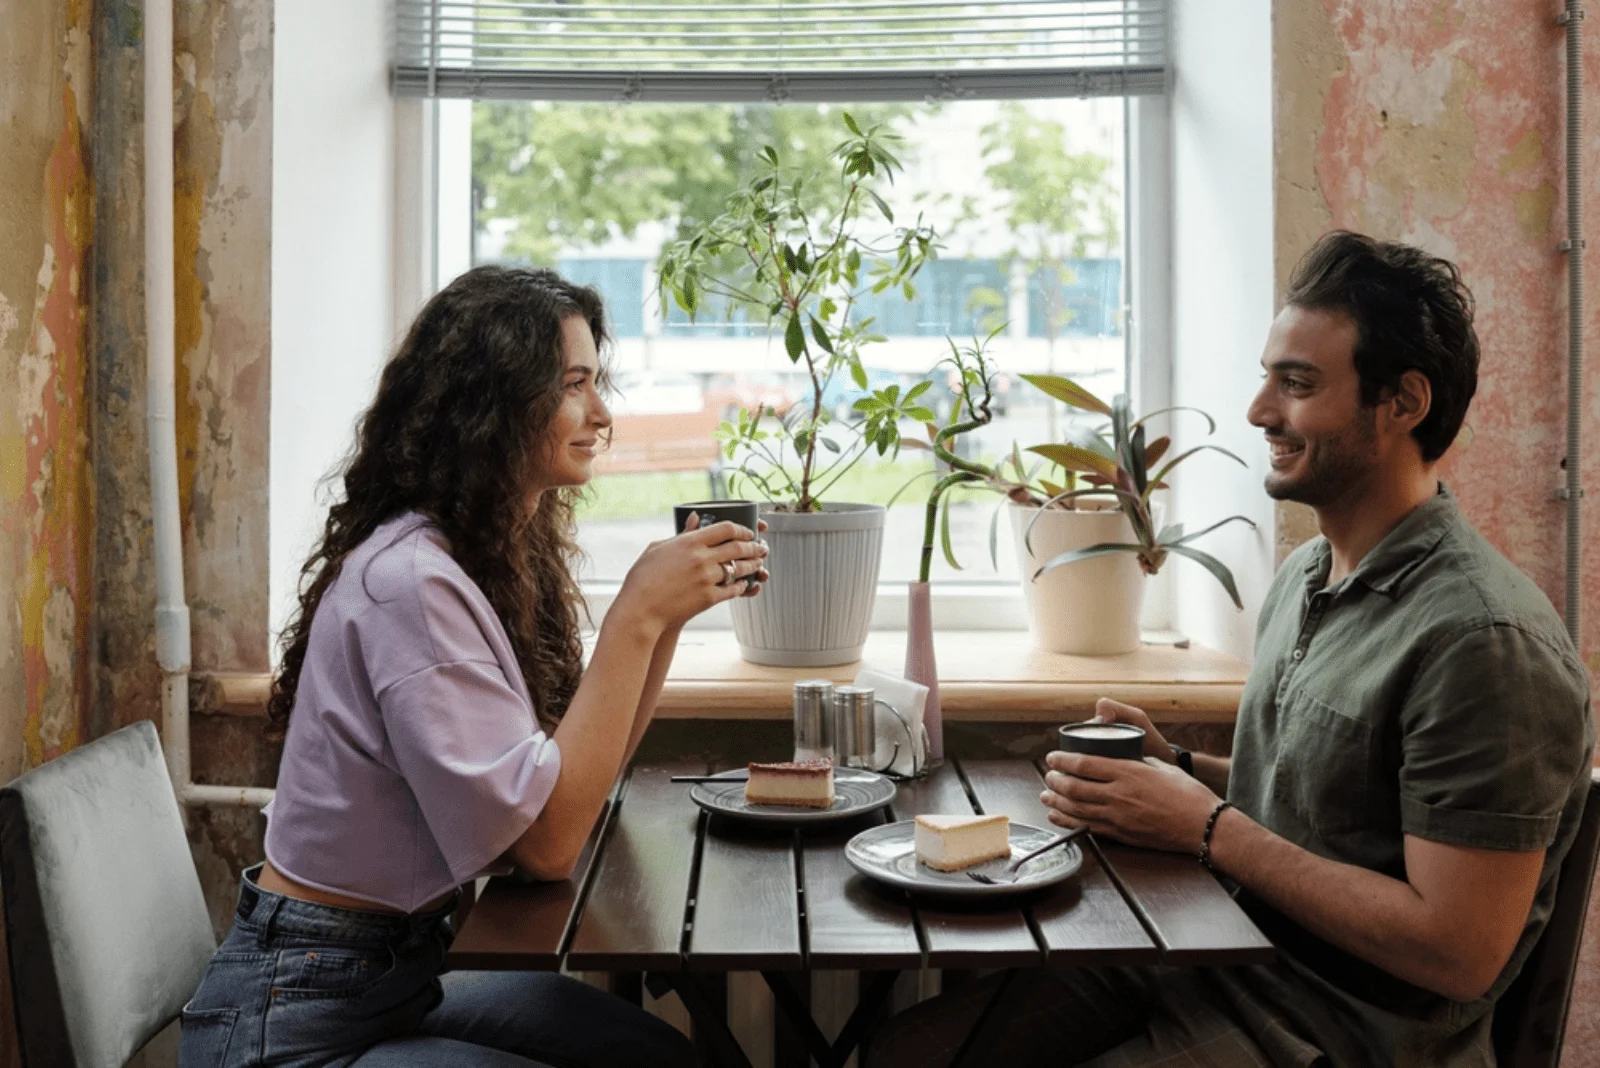 A smiling man and woman are sitting in a restaurant